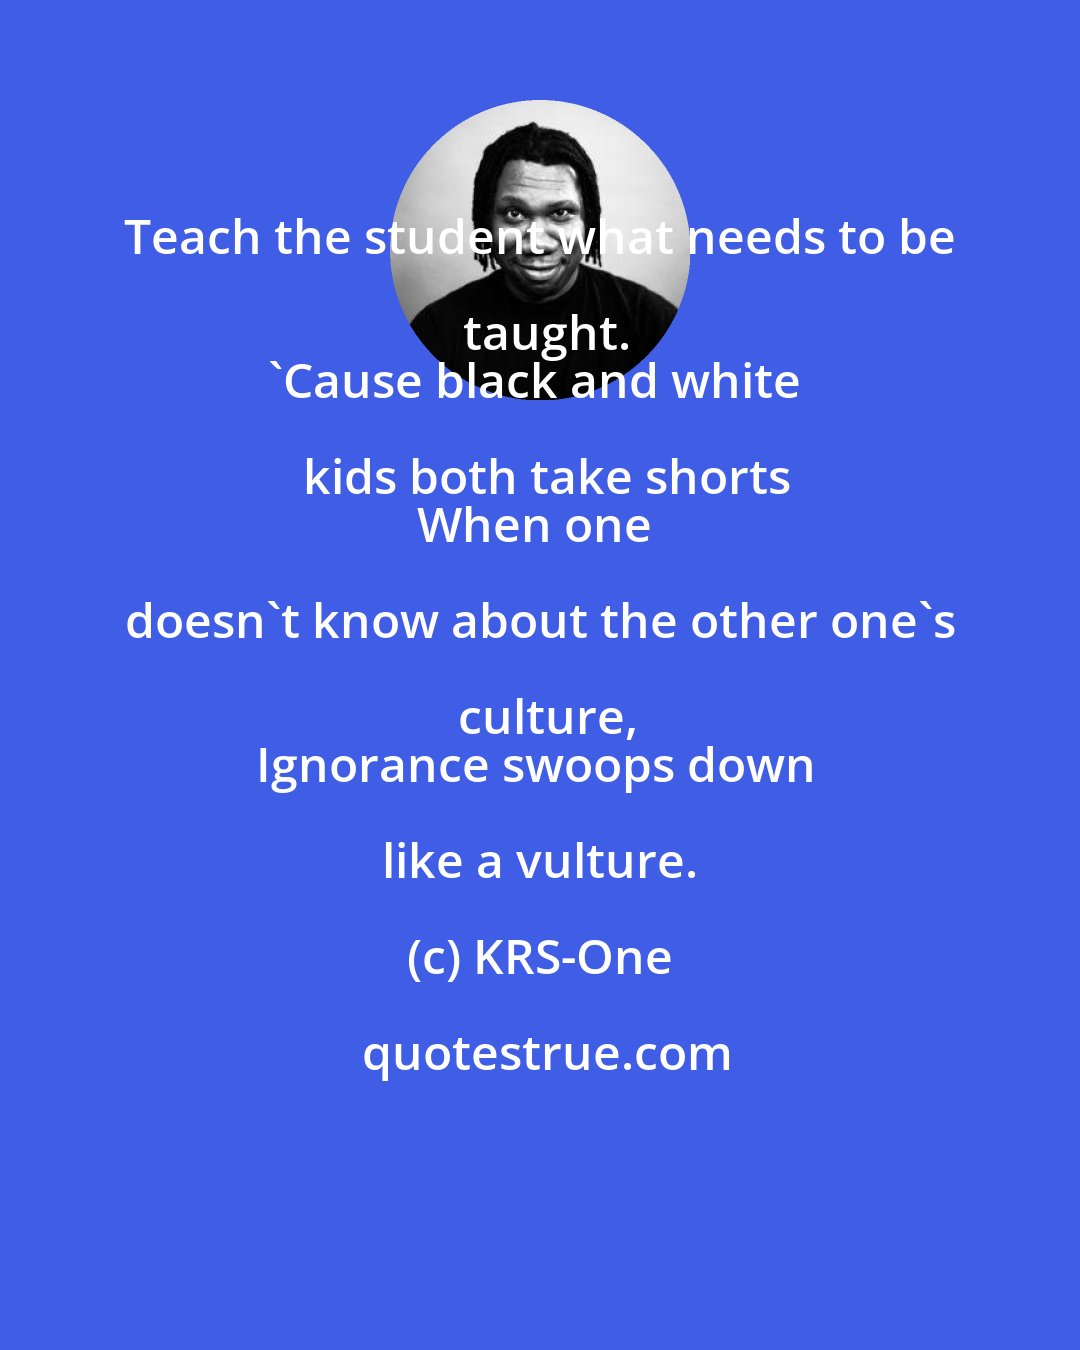 KRS-One: Teach the student what needs to be taught.
'Cause black and white kids both take shorts
When one doesn't know about the other one's culture,
Ignorance swoops down like a vulture.